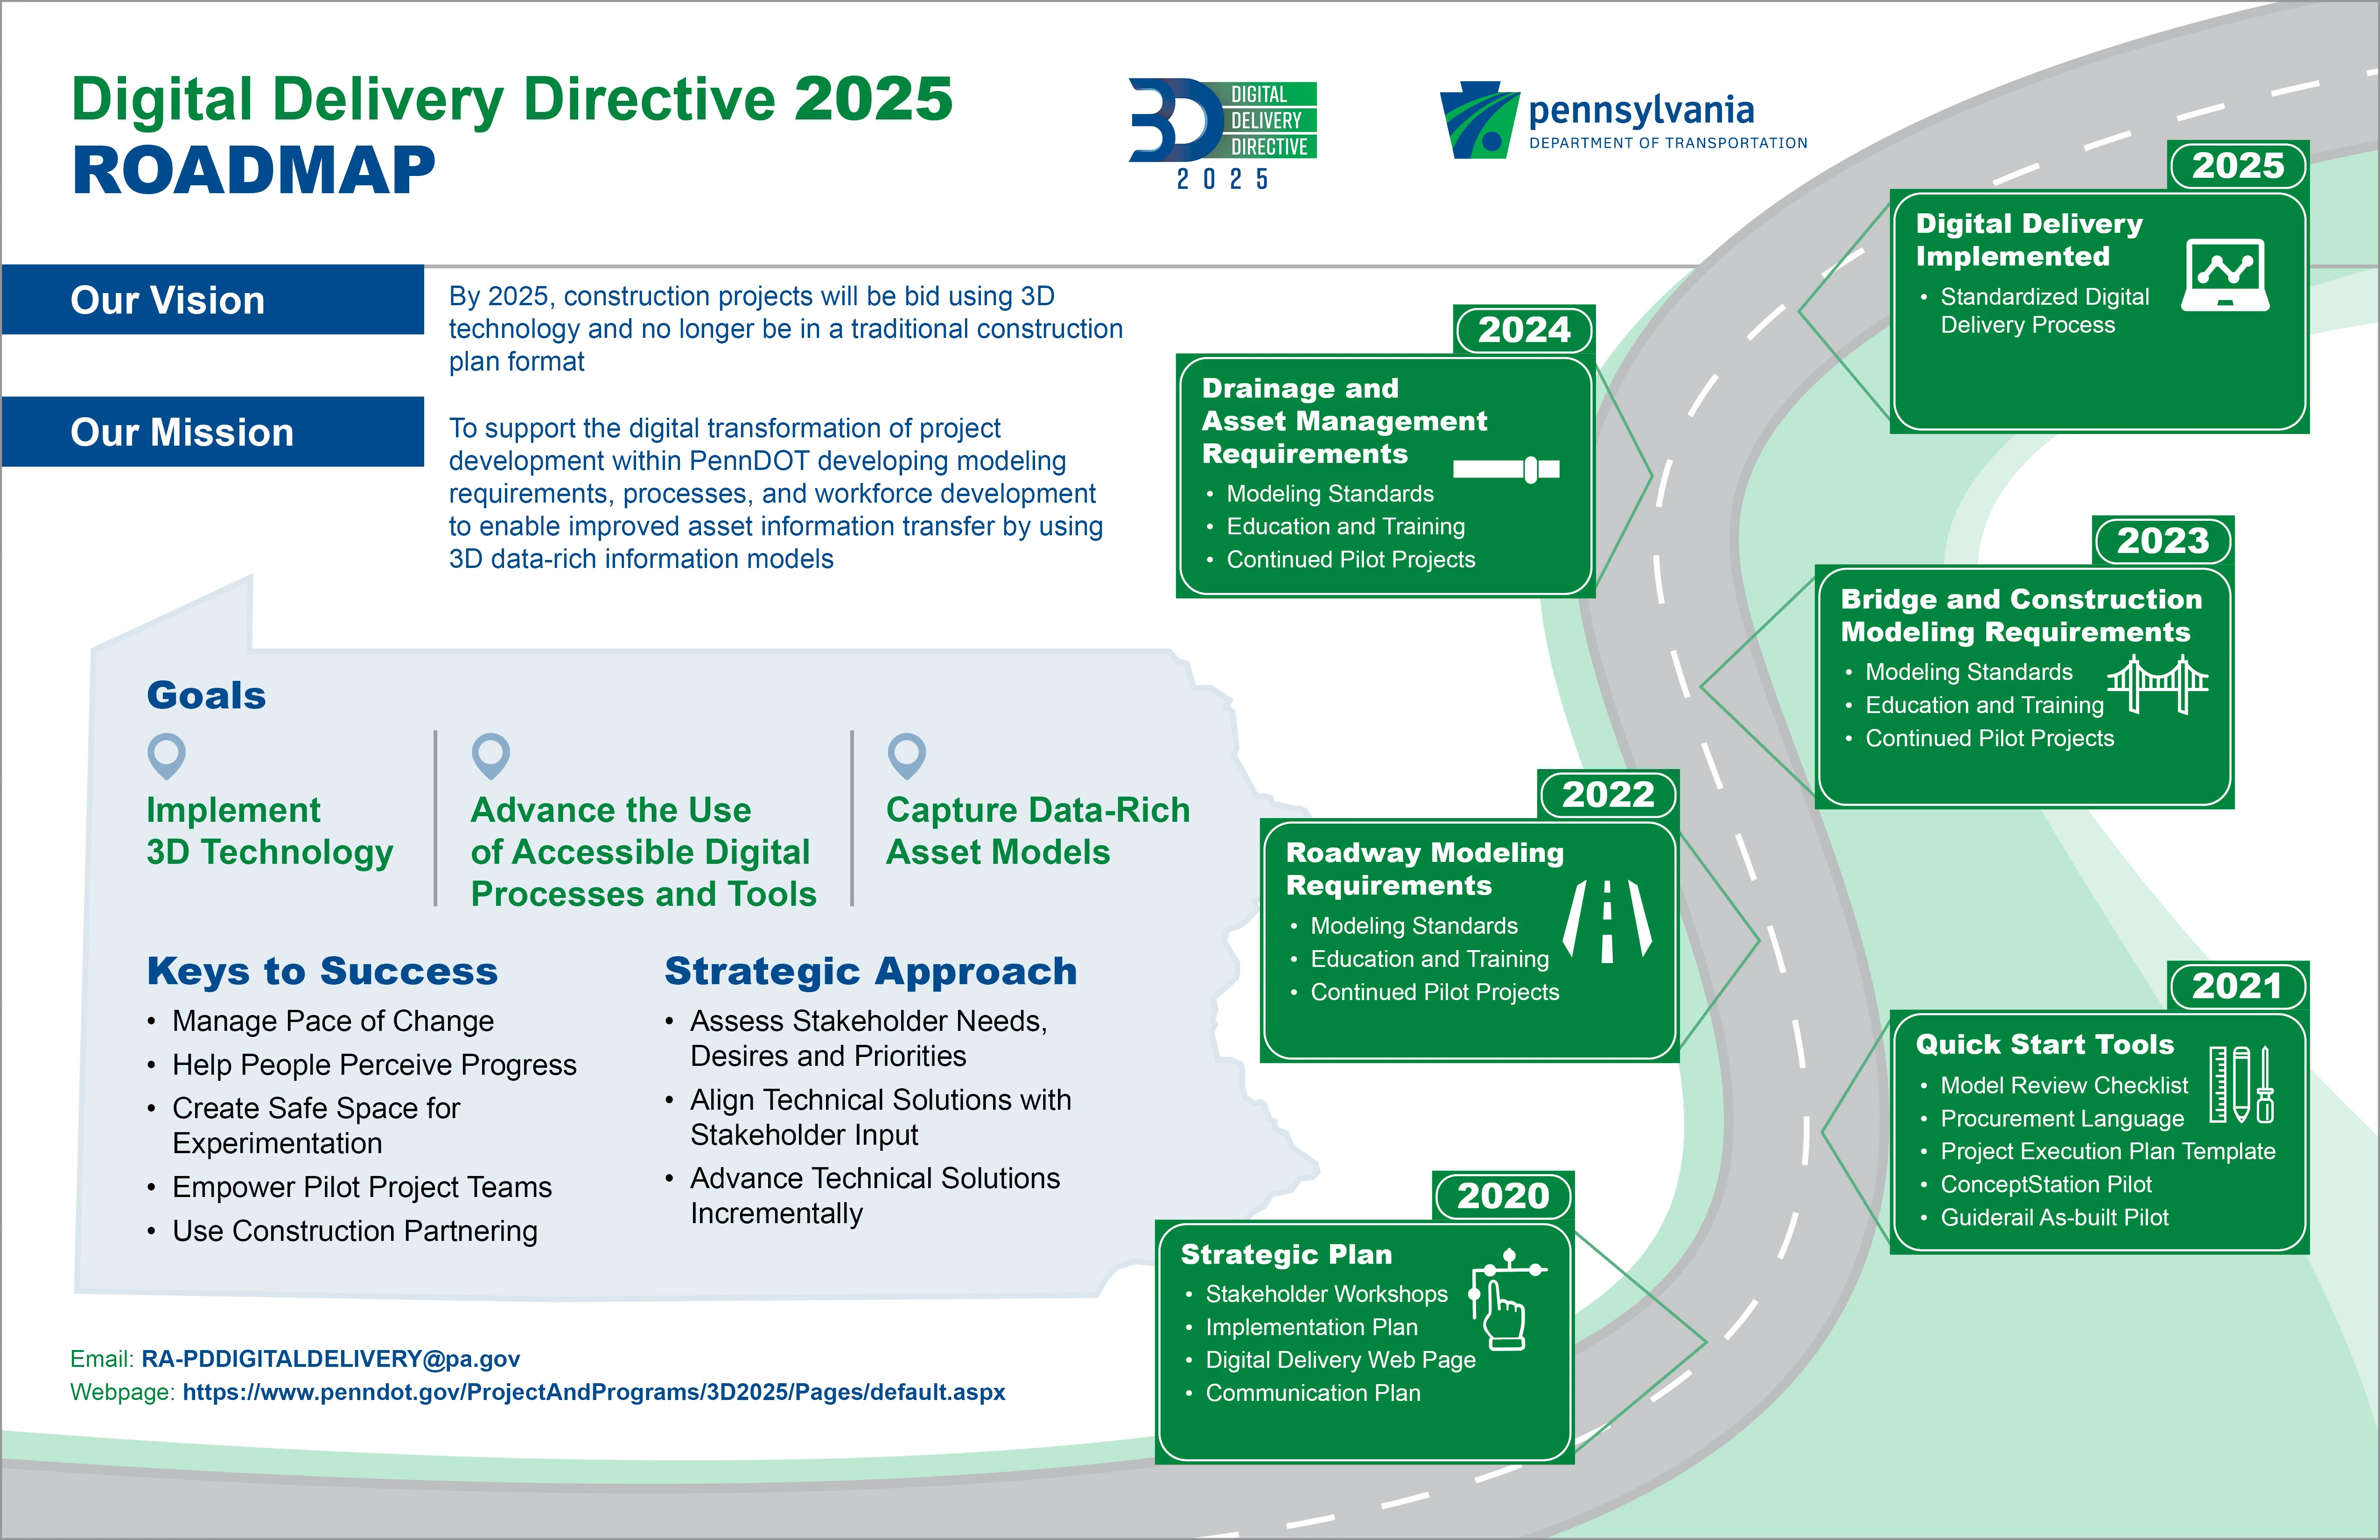 An image of PennDOT's Digital Delivery Directive 2025 Roadmap that includes the vision, mission, and goals for the initiative, and shows a winding roadway with green highway signs listing each year of the project from 2020 to 2025 and what PennDOT has accomplished/plans to accomplish in each of those years.